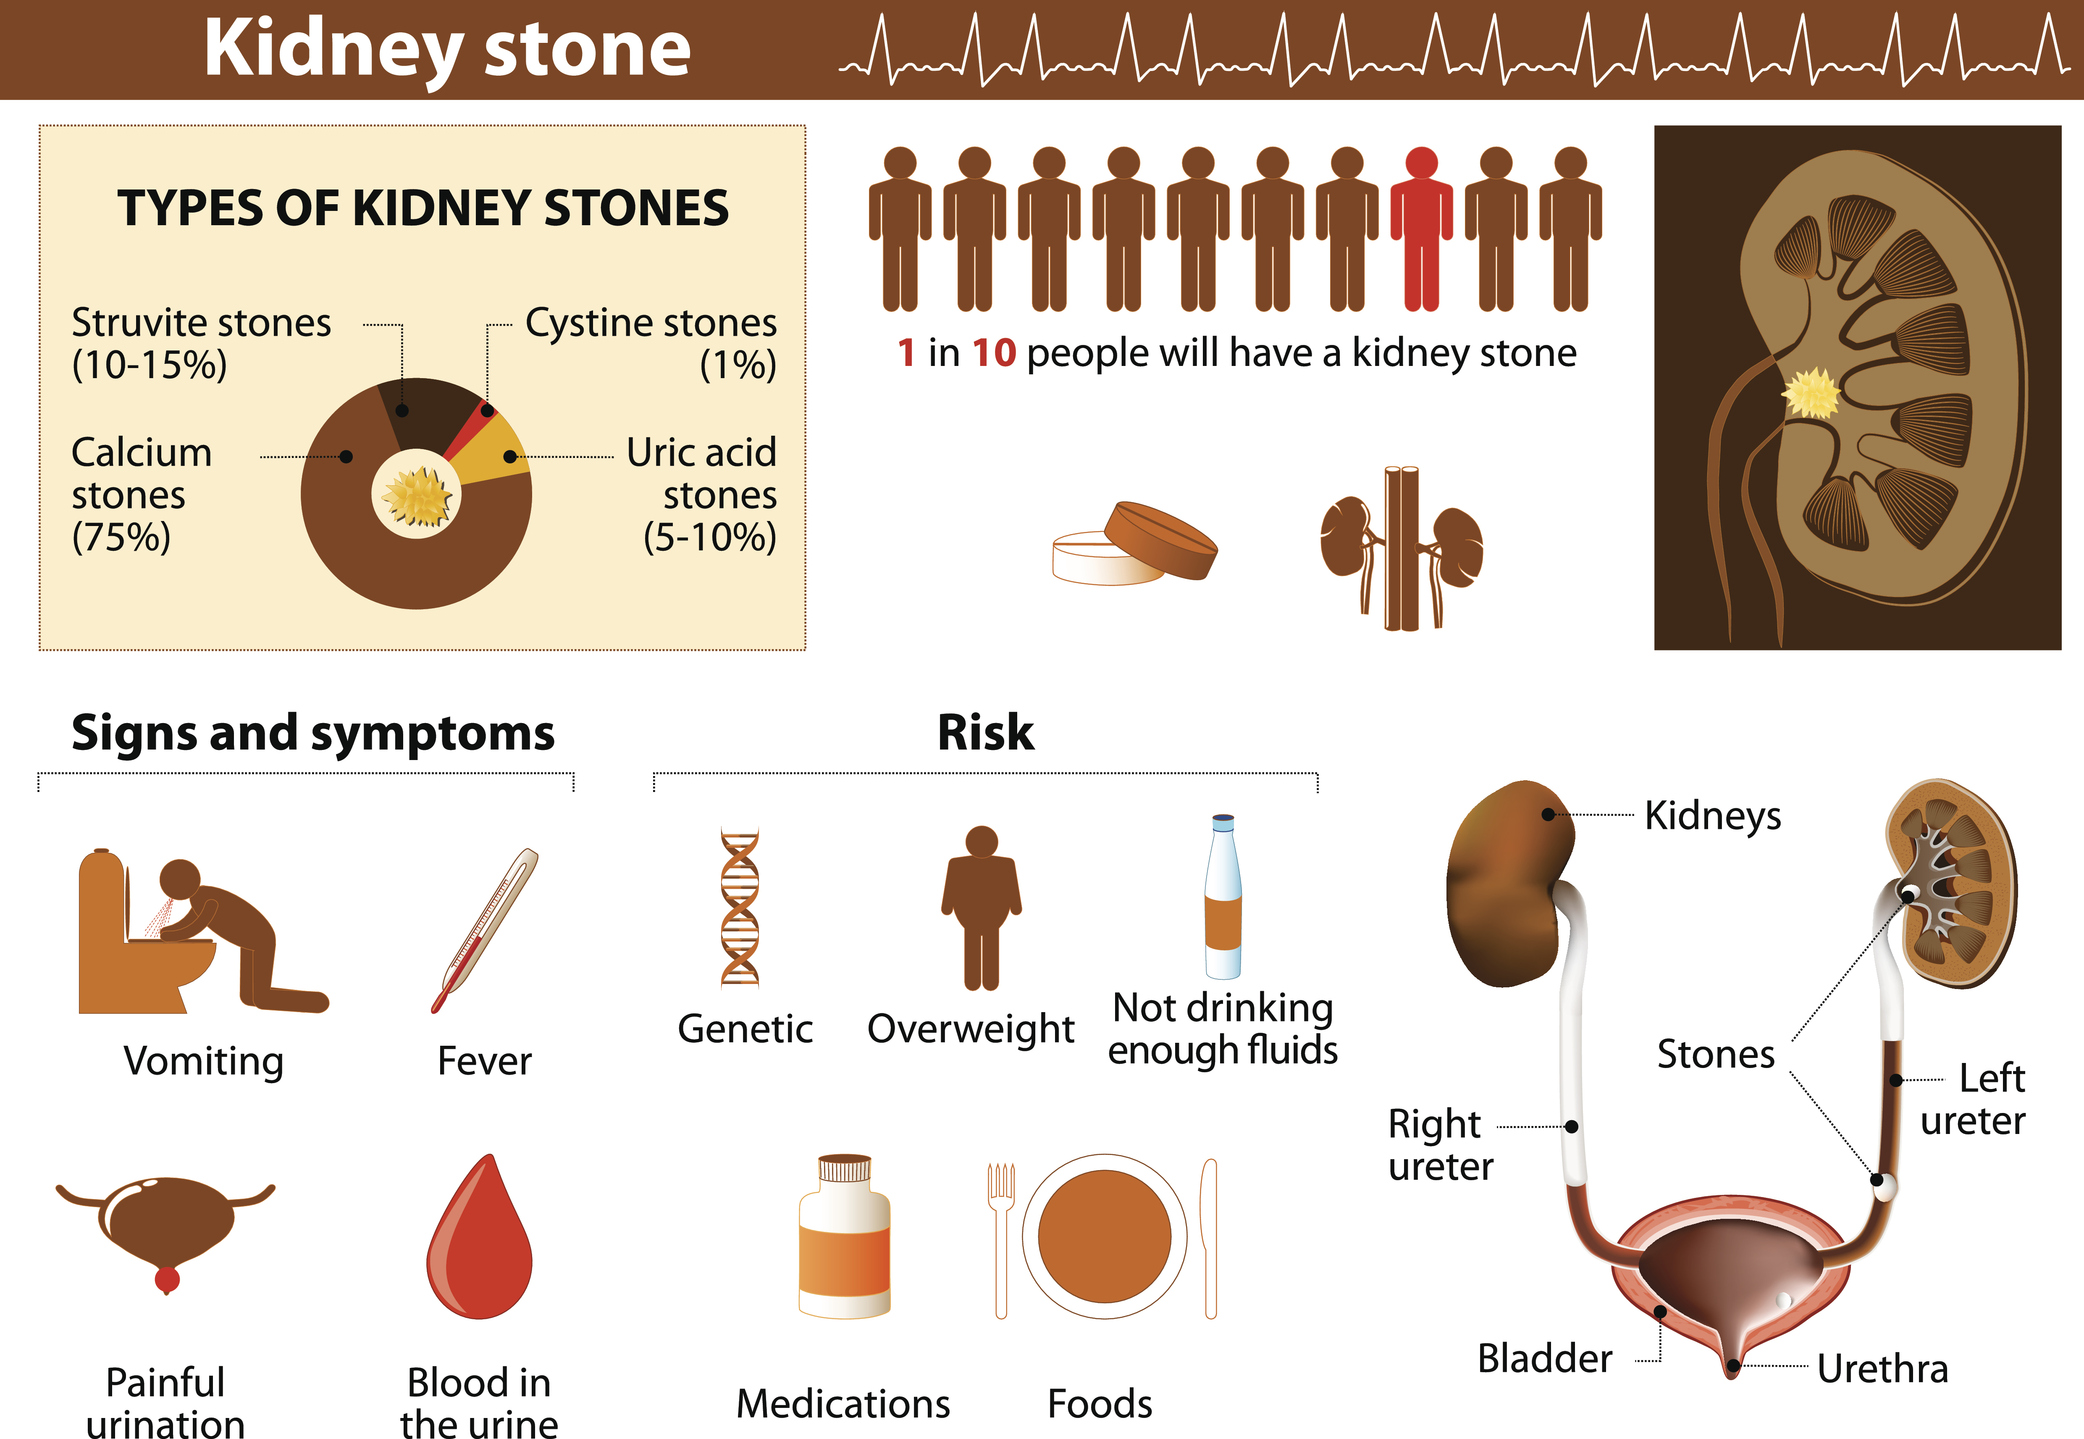 how to pass a kidney stone